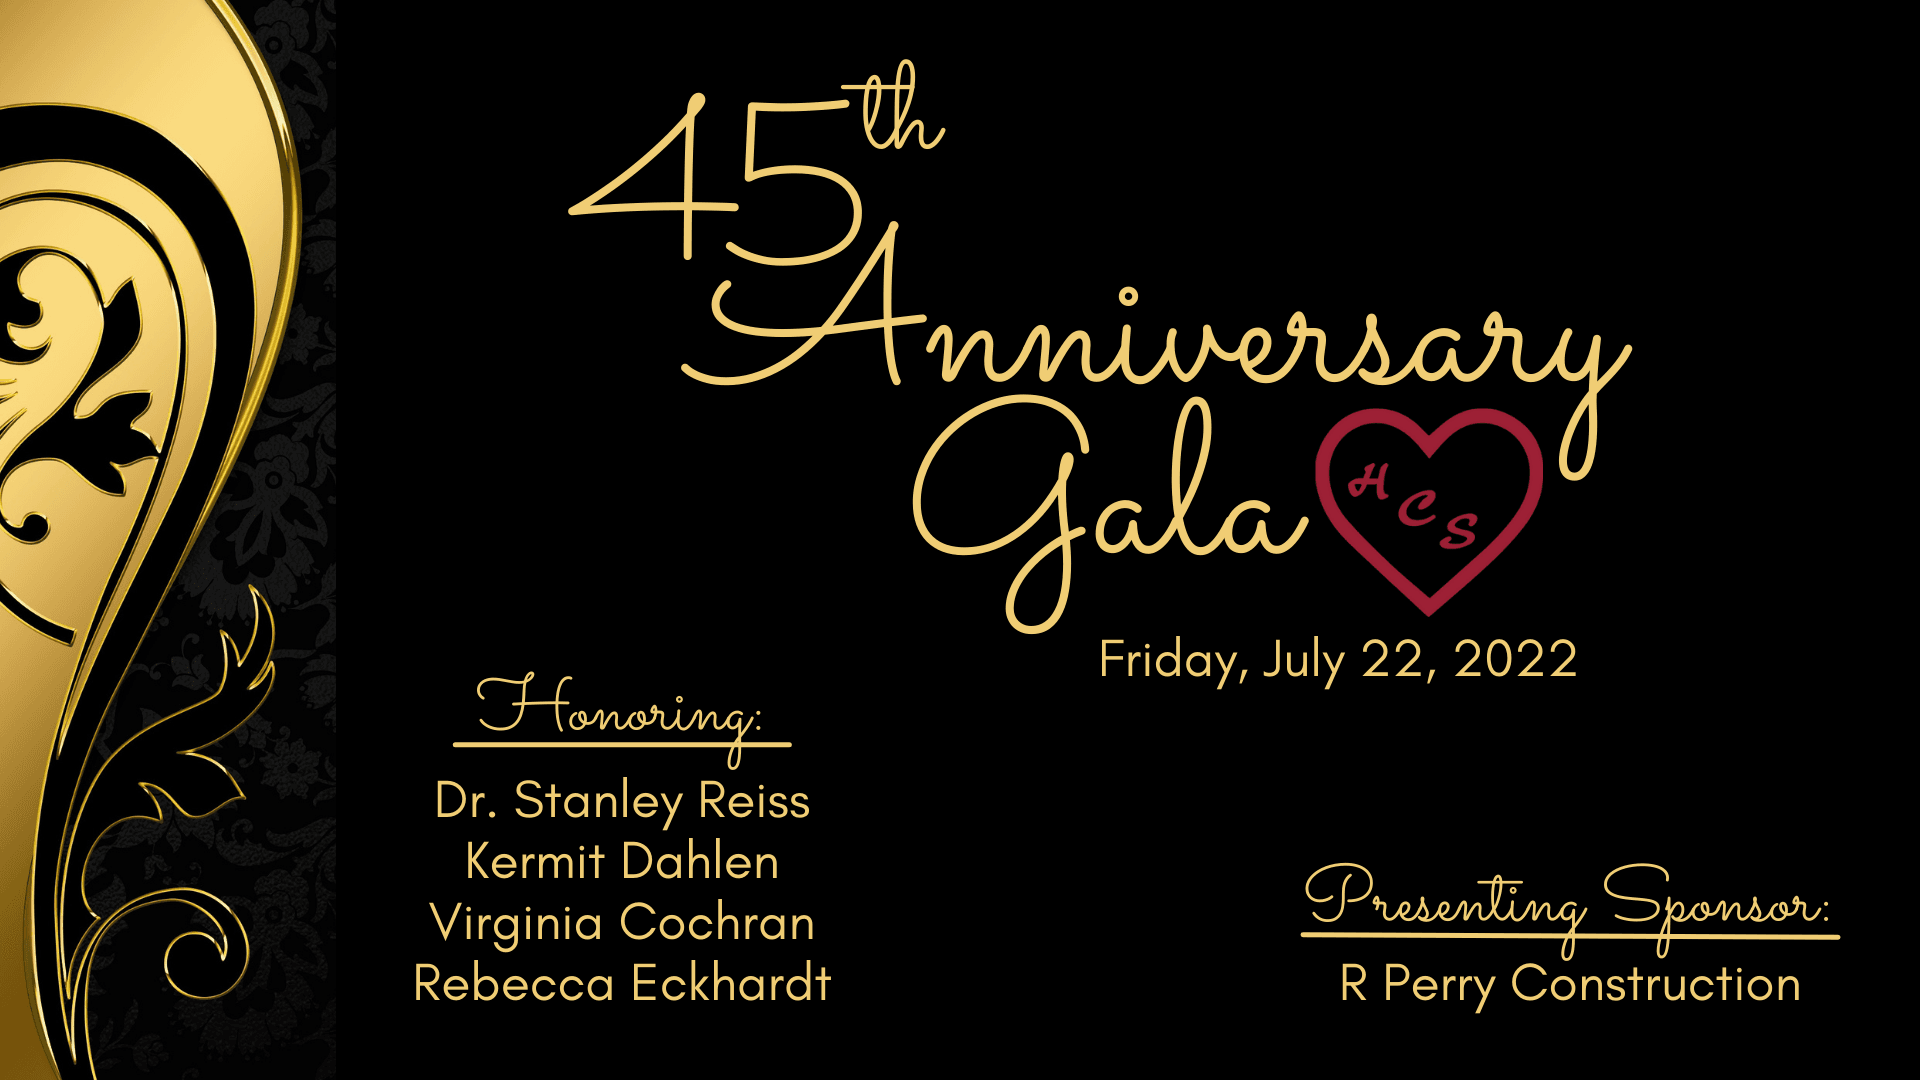 Heartland Counseling Services Celebrates 45th Anniversary with Inaugural Gala Event